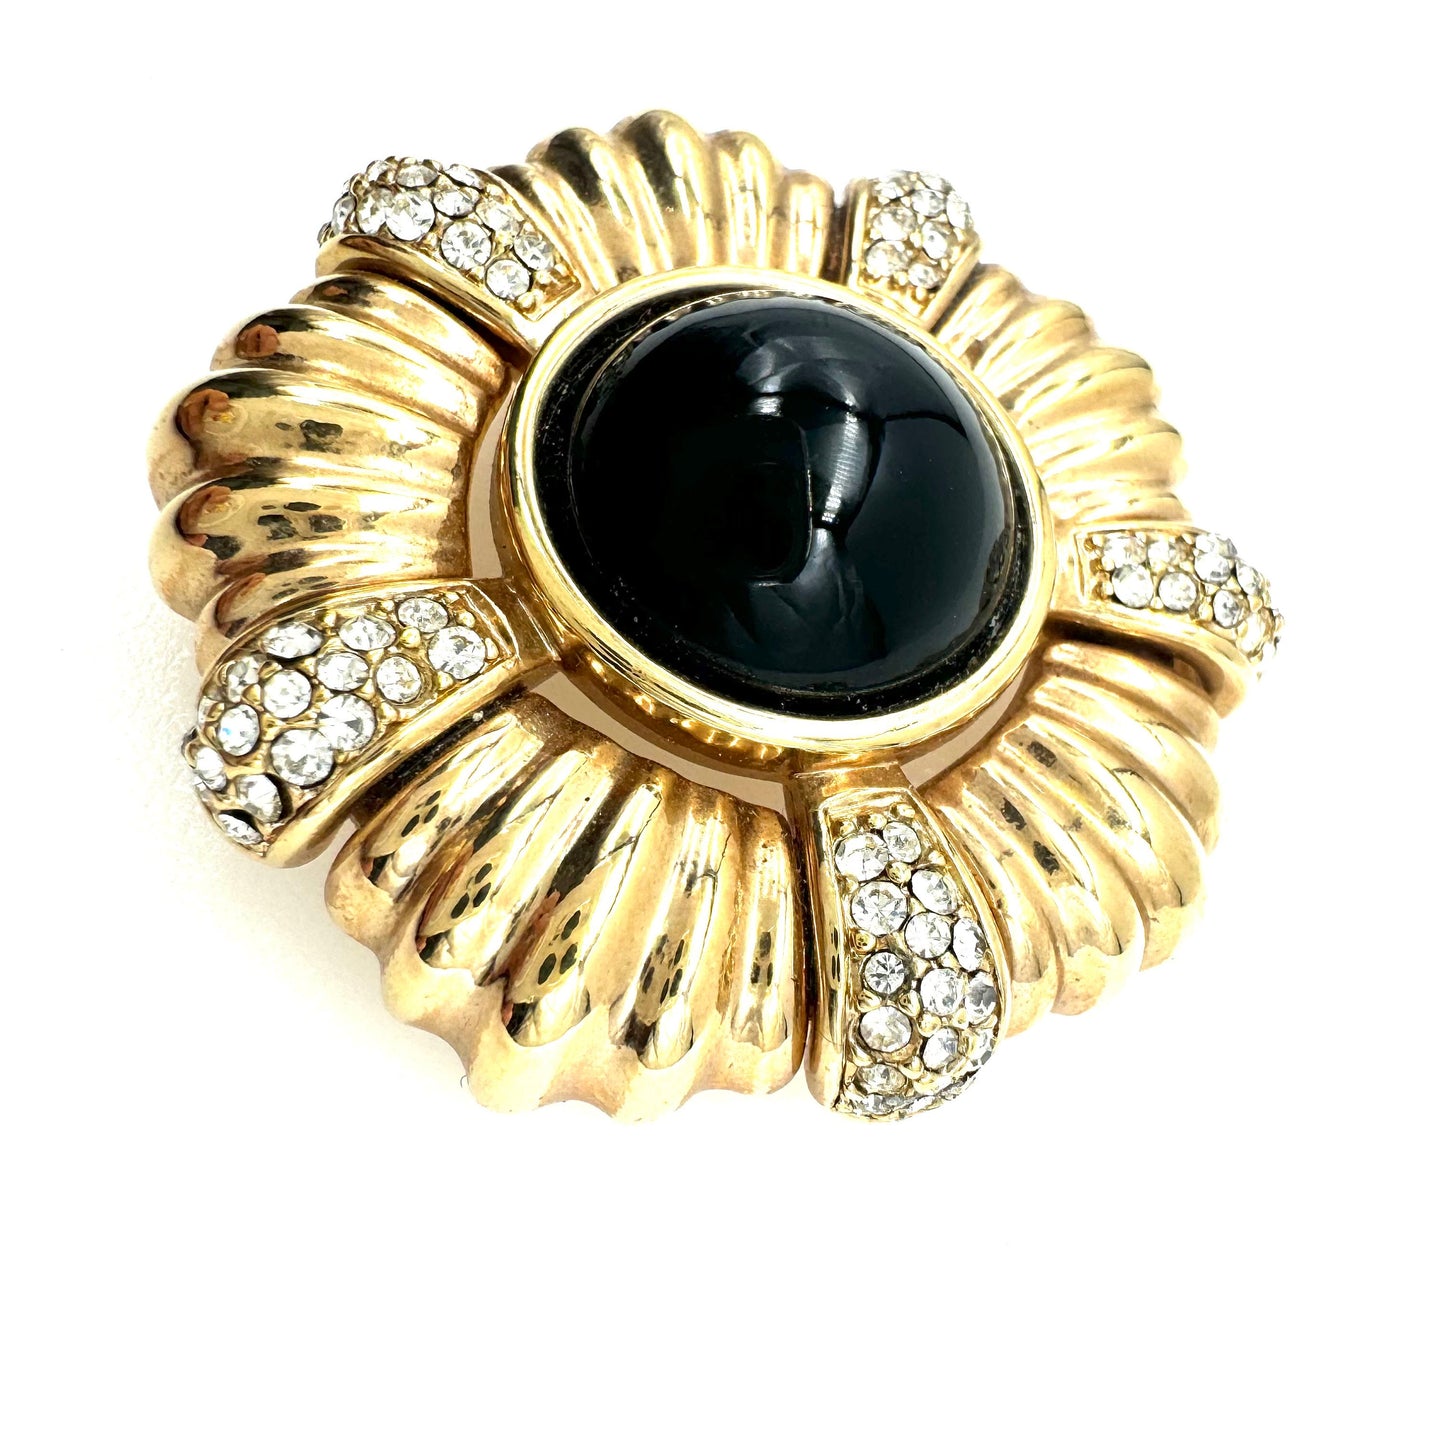 S.A.L. Swarovski America Limited 18ct Gold Plated Black Glass Cabochon and Crystal Brooch